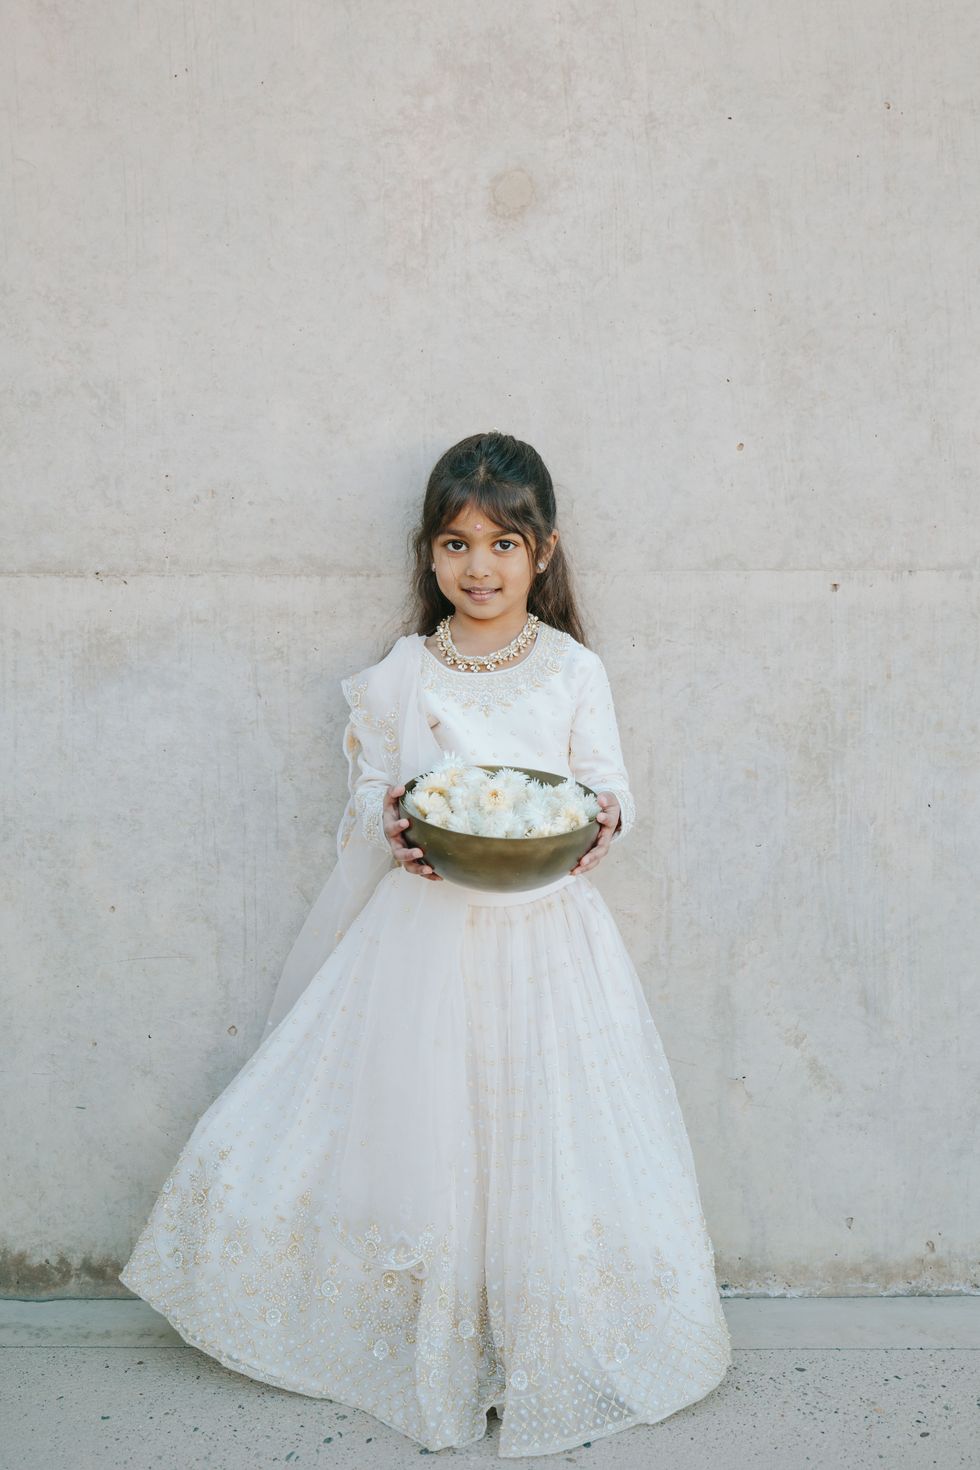 a person in a white dress holding a cake